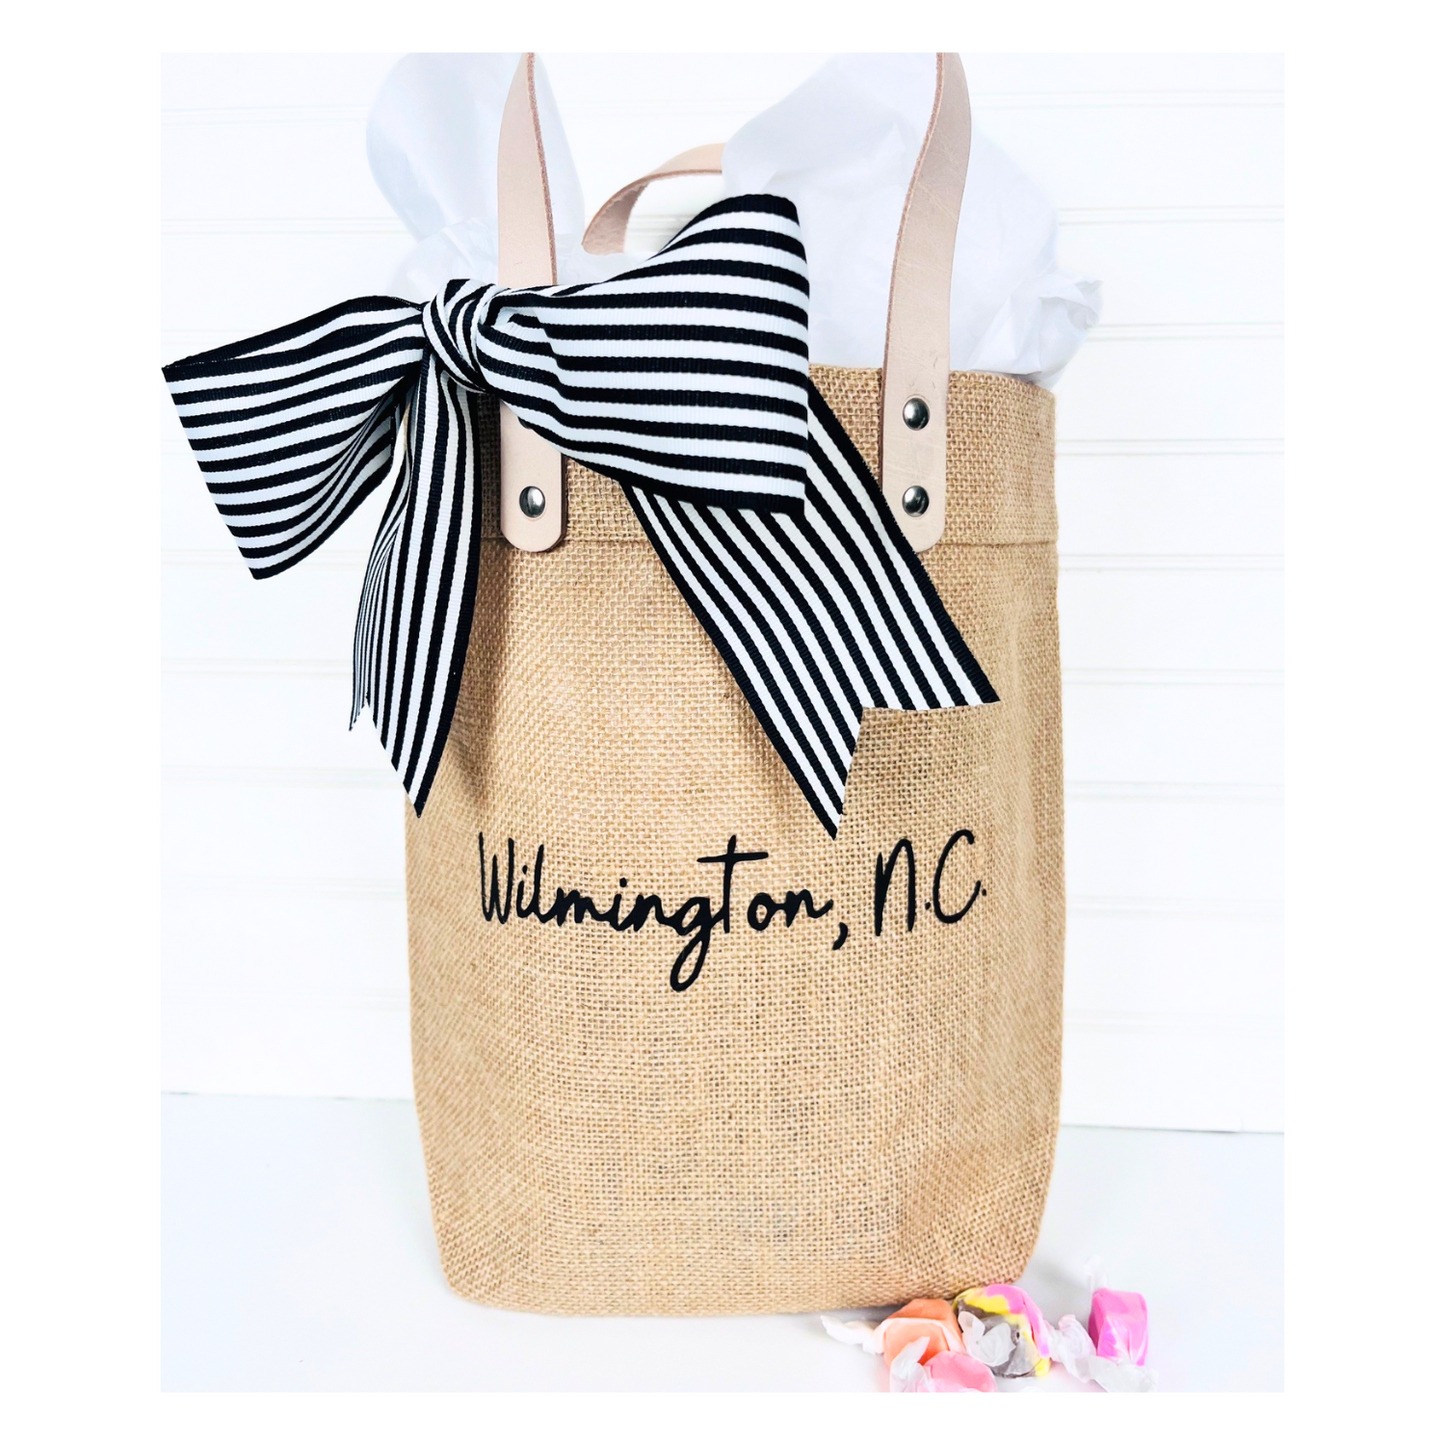 Wilmington Tote with Goodies